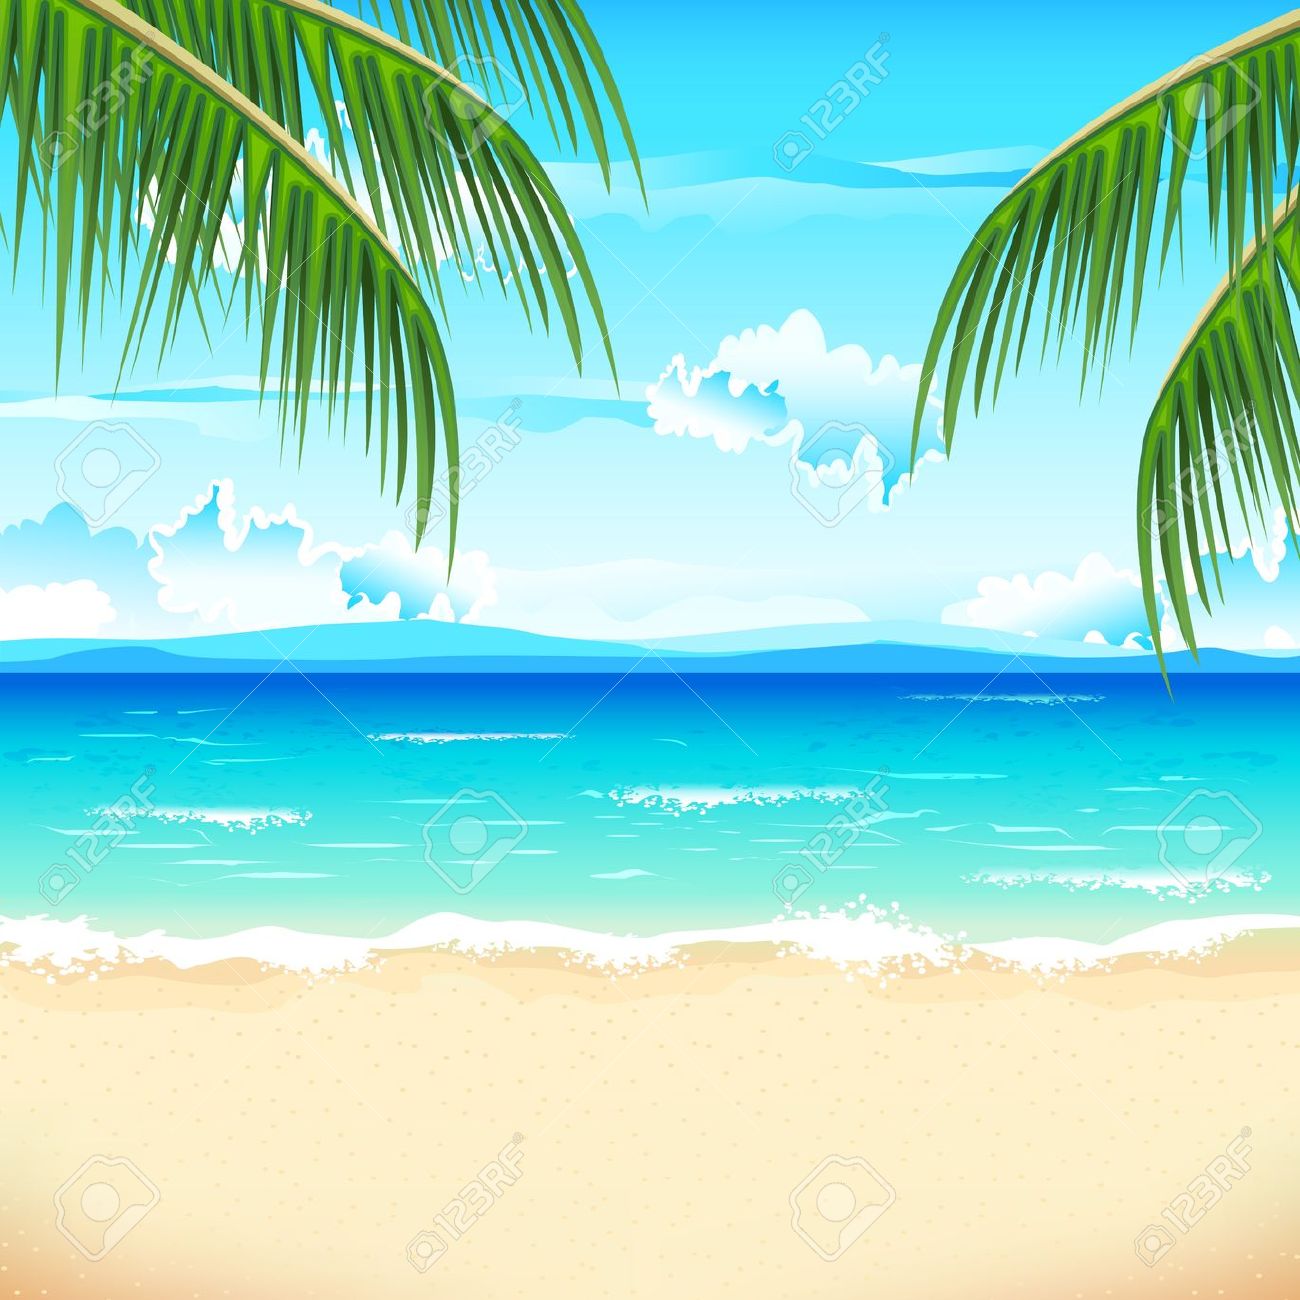 Free Summer Backgrounds Cliparts, Download Free Clip Art